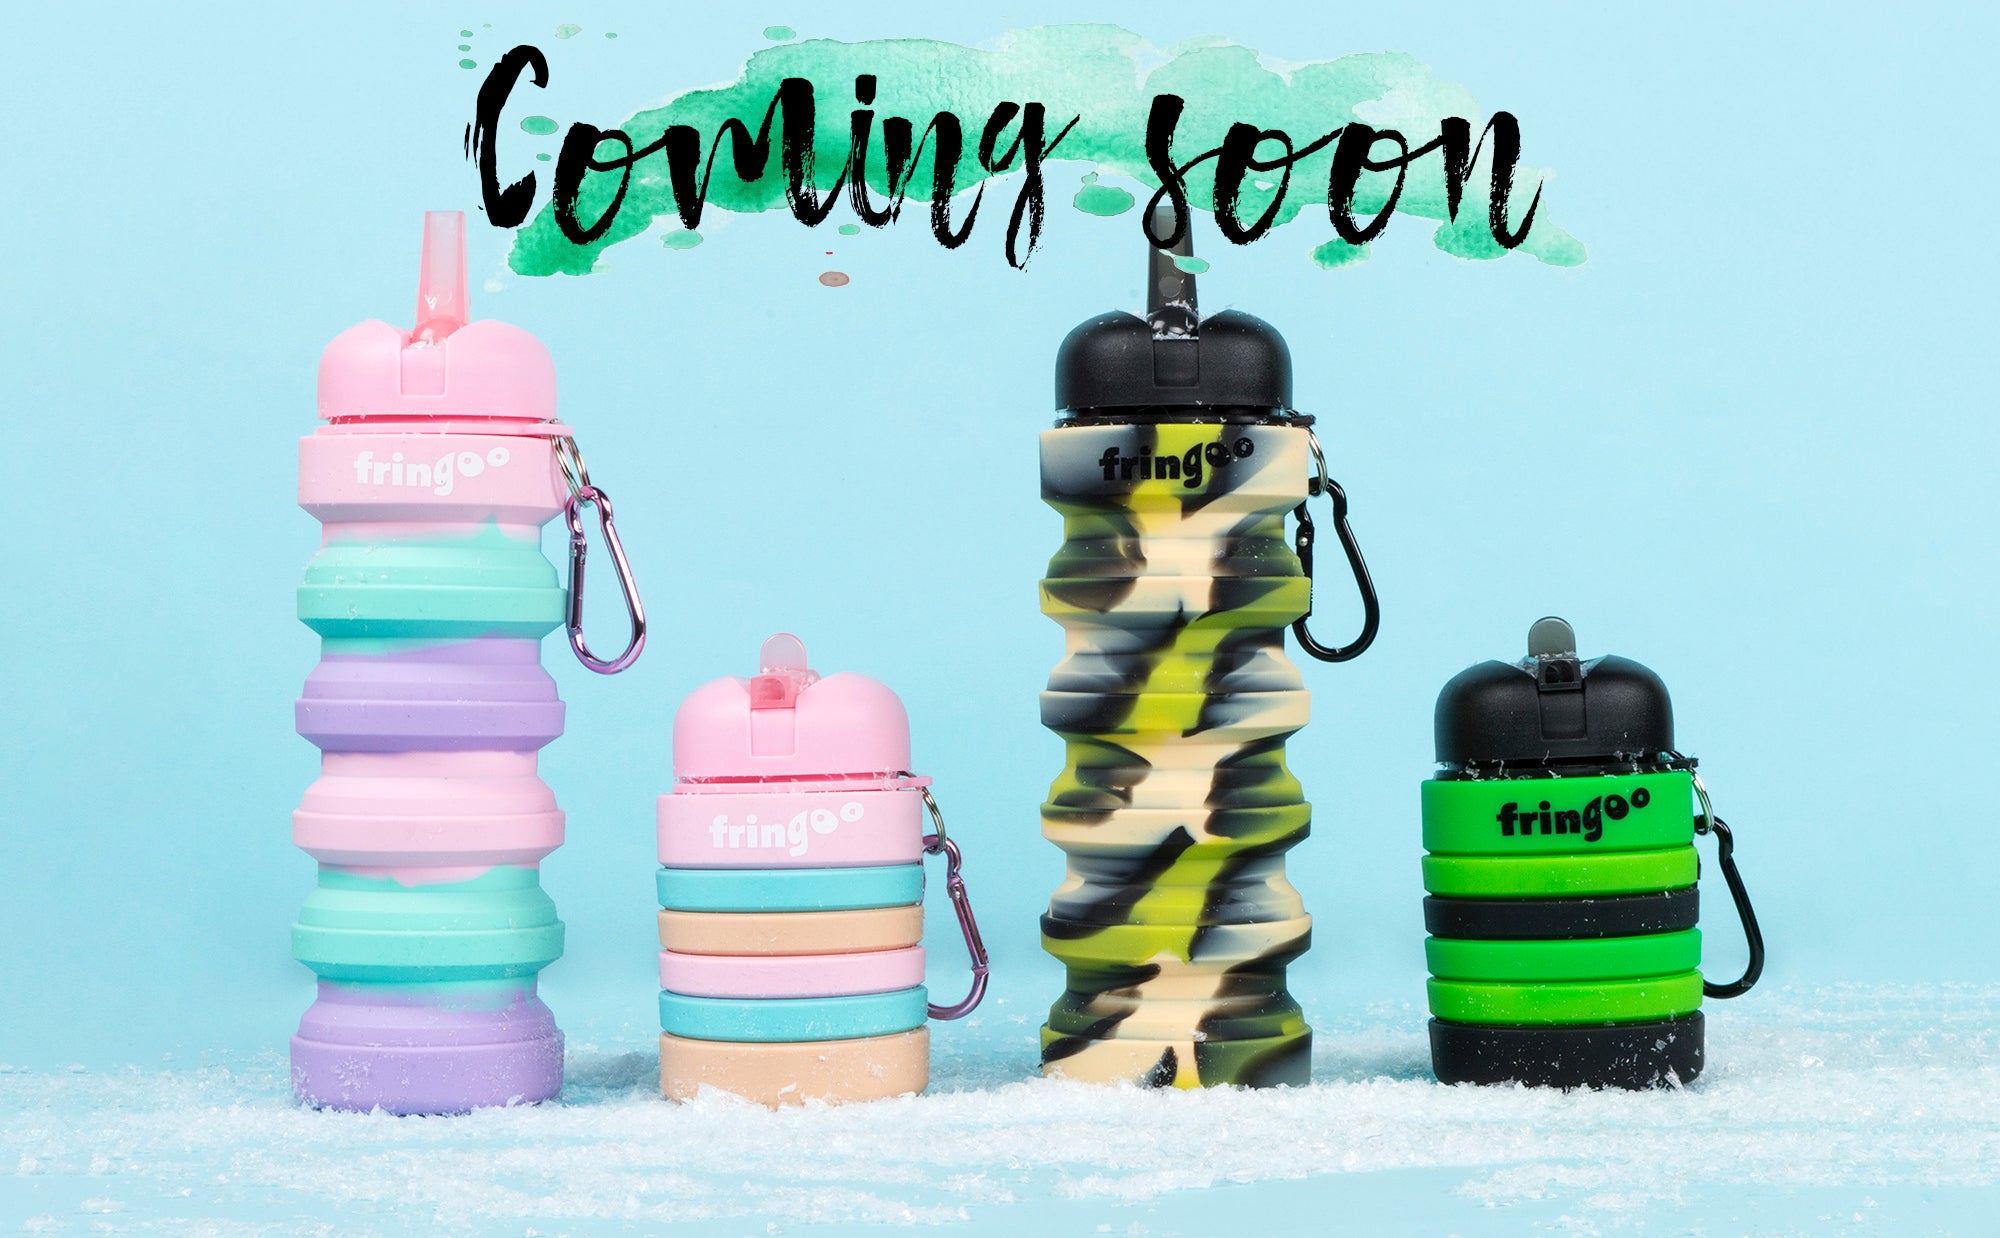 Camo print drinks bottle, an on-trend accessory for Christmas 2018